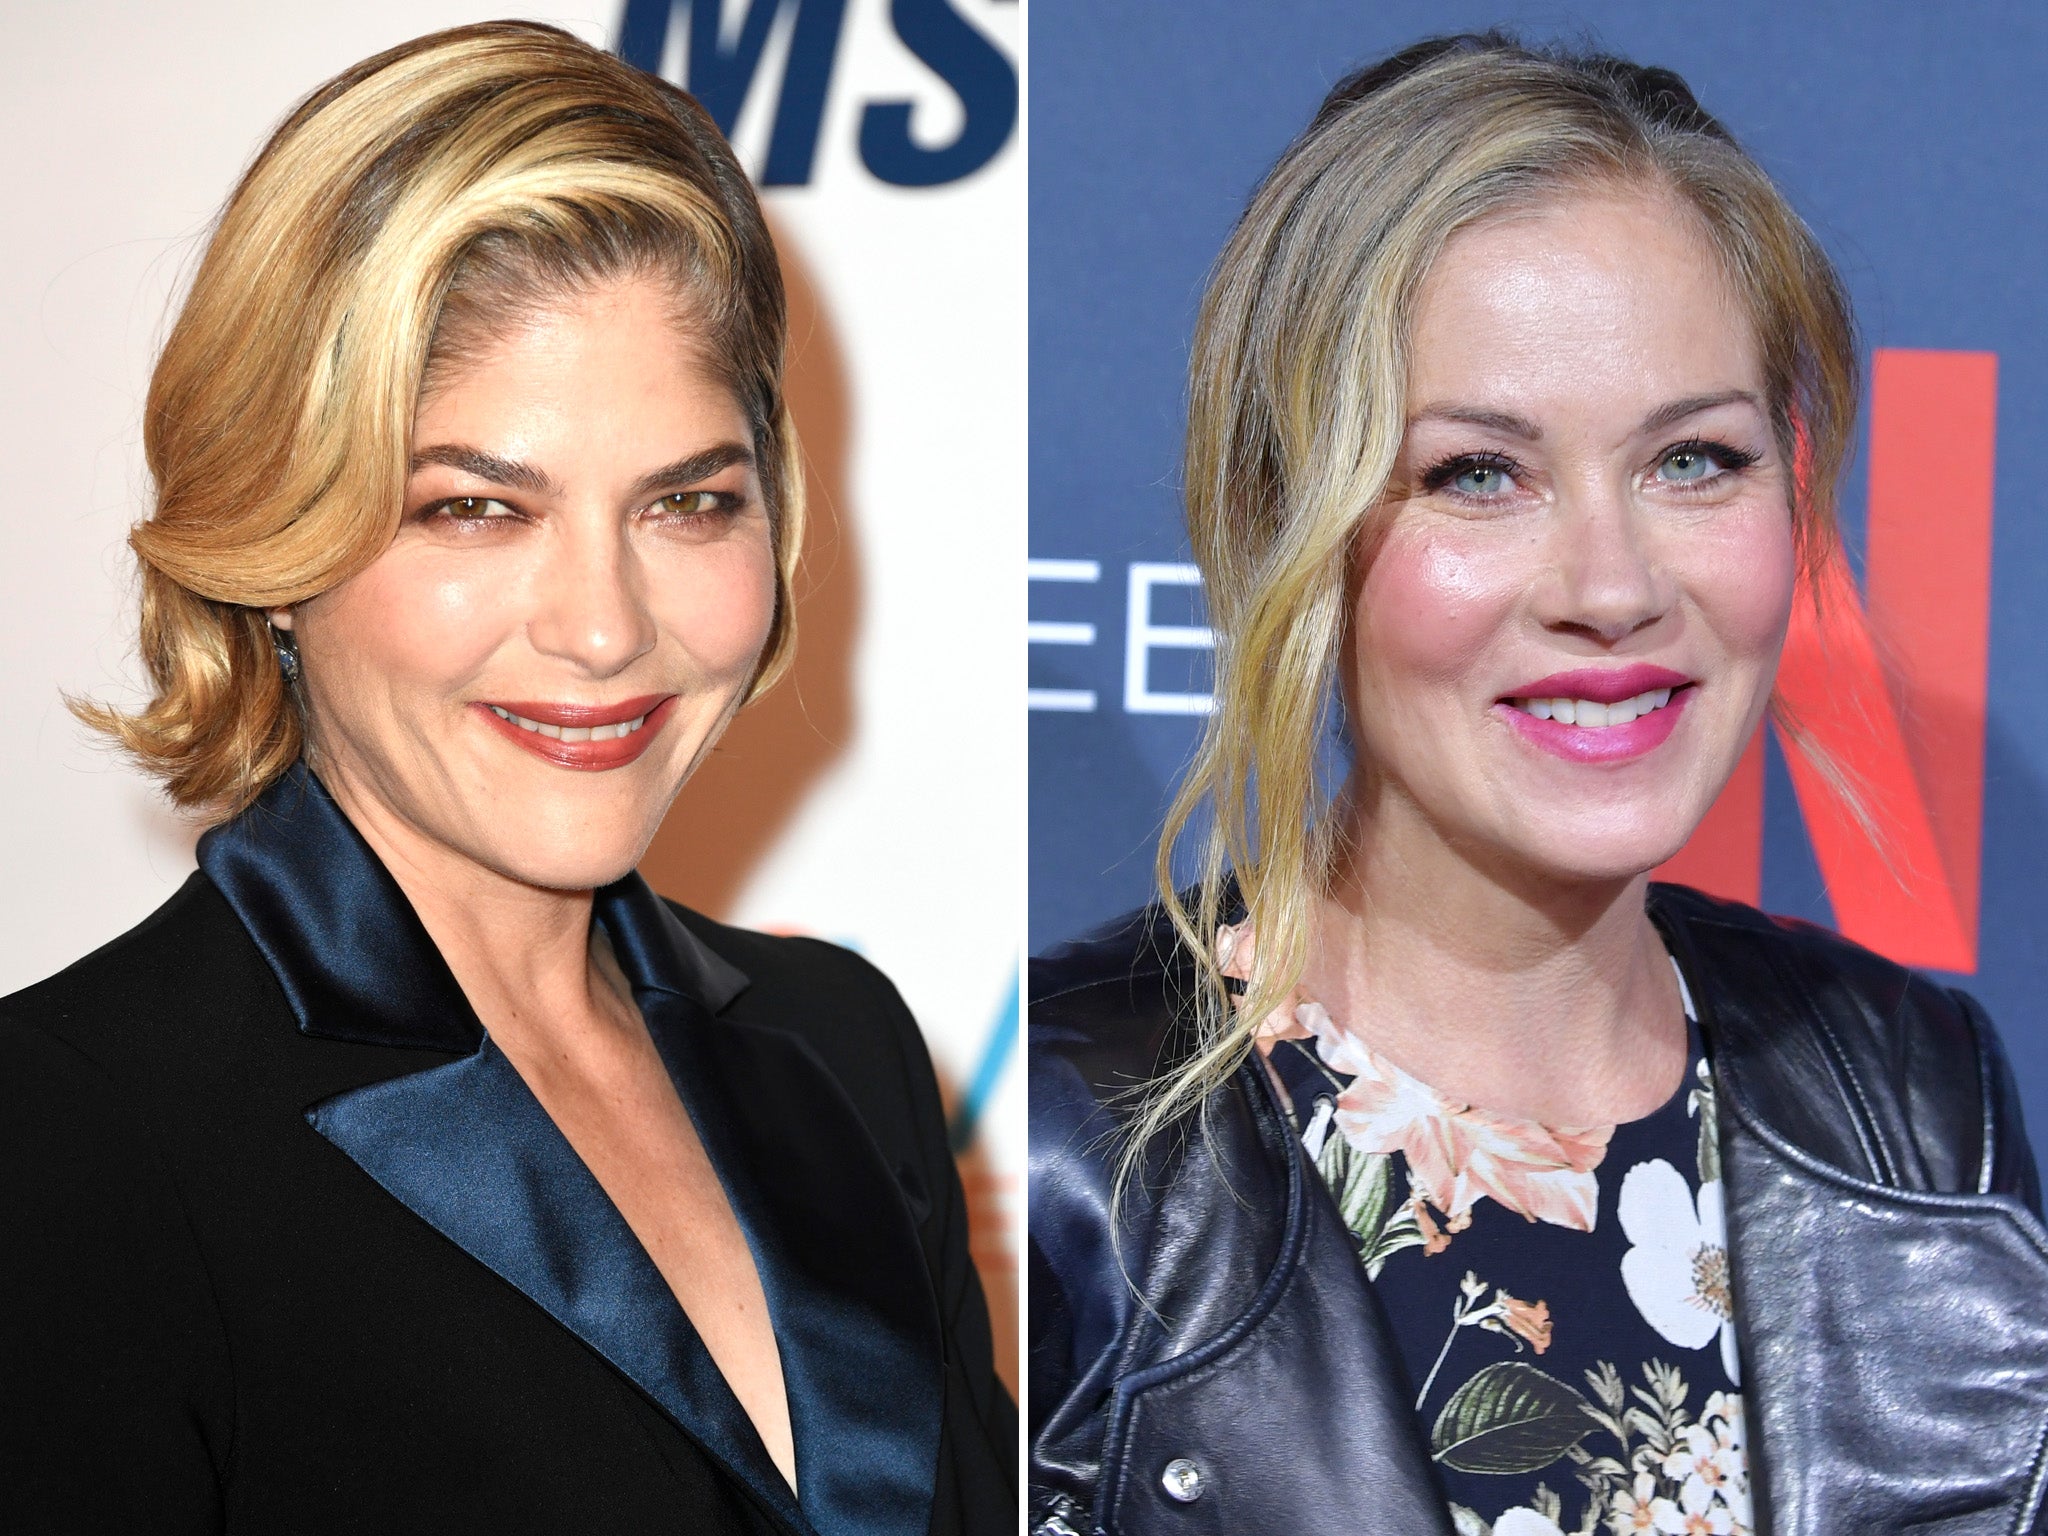 Selma Blair shared support to Christina Applegate over shared MS diagnosis